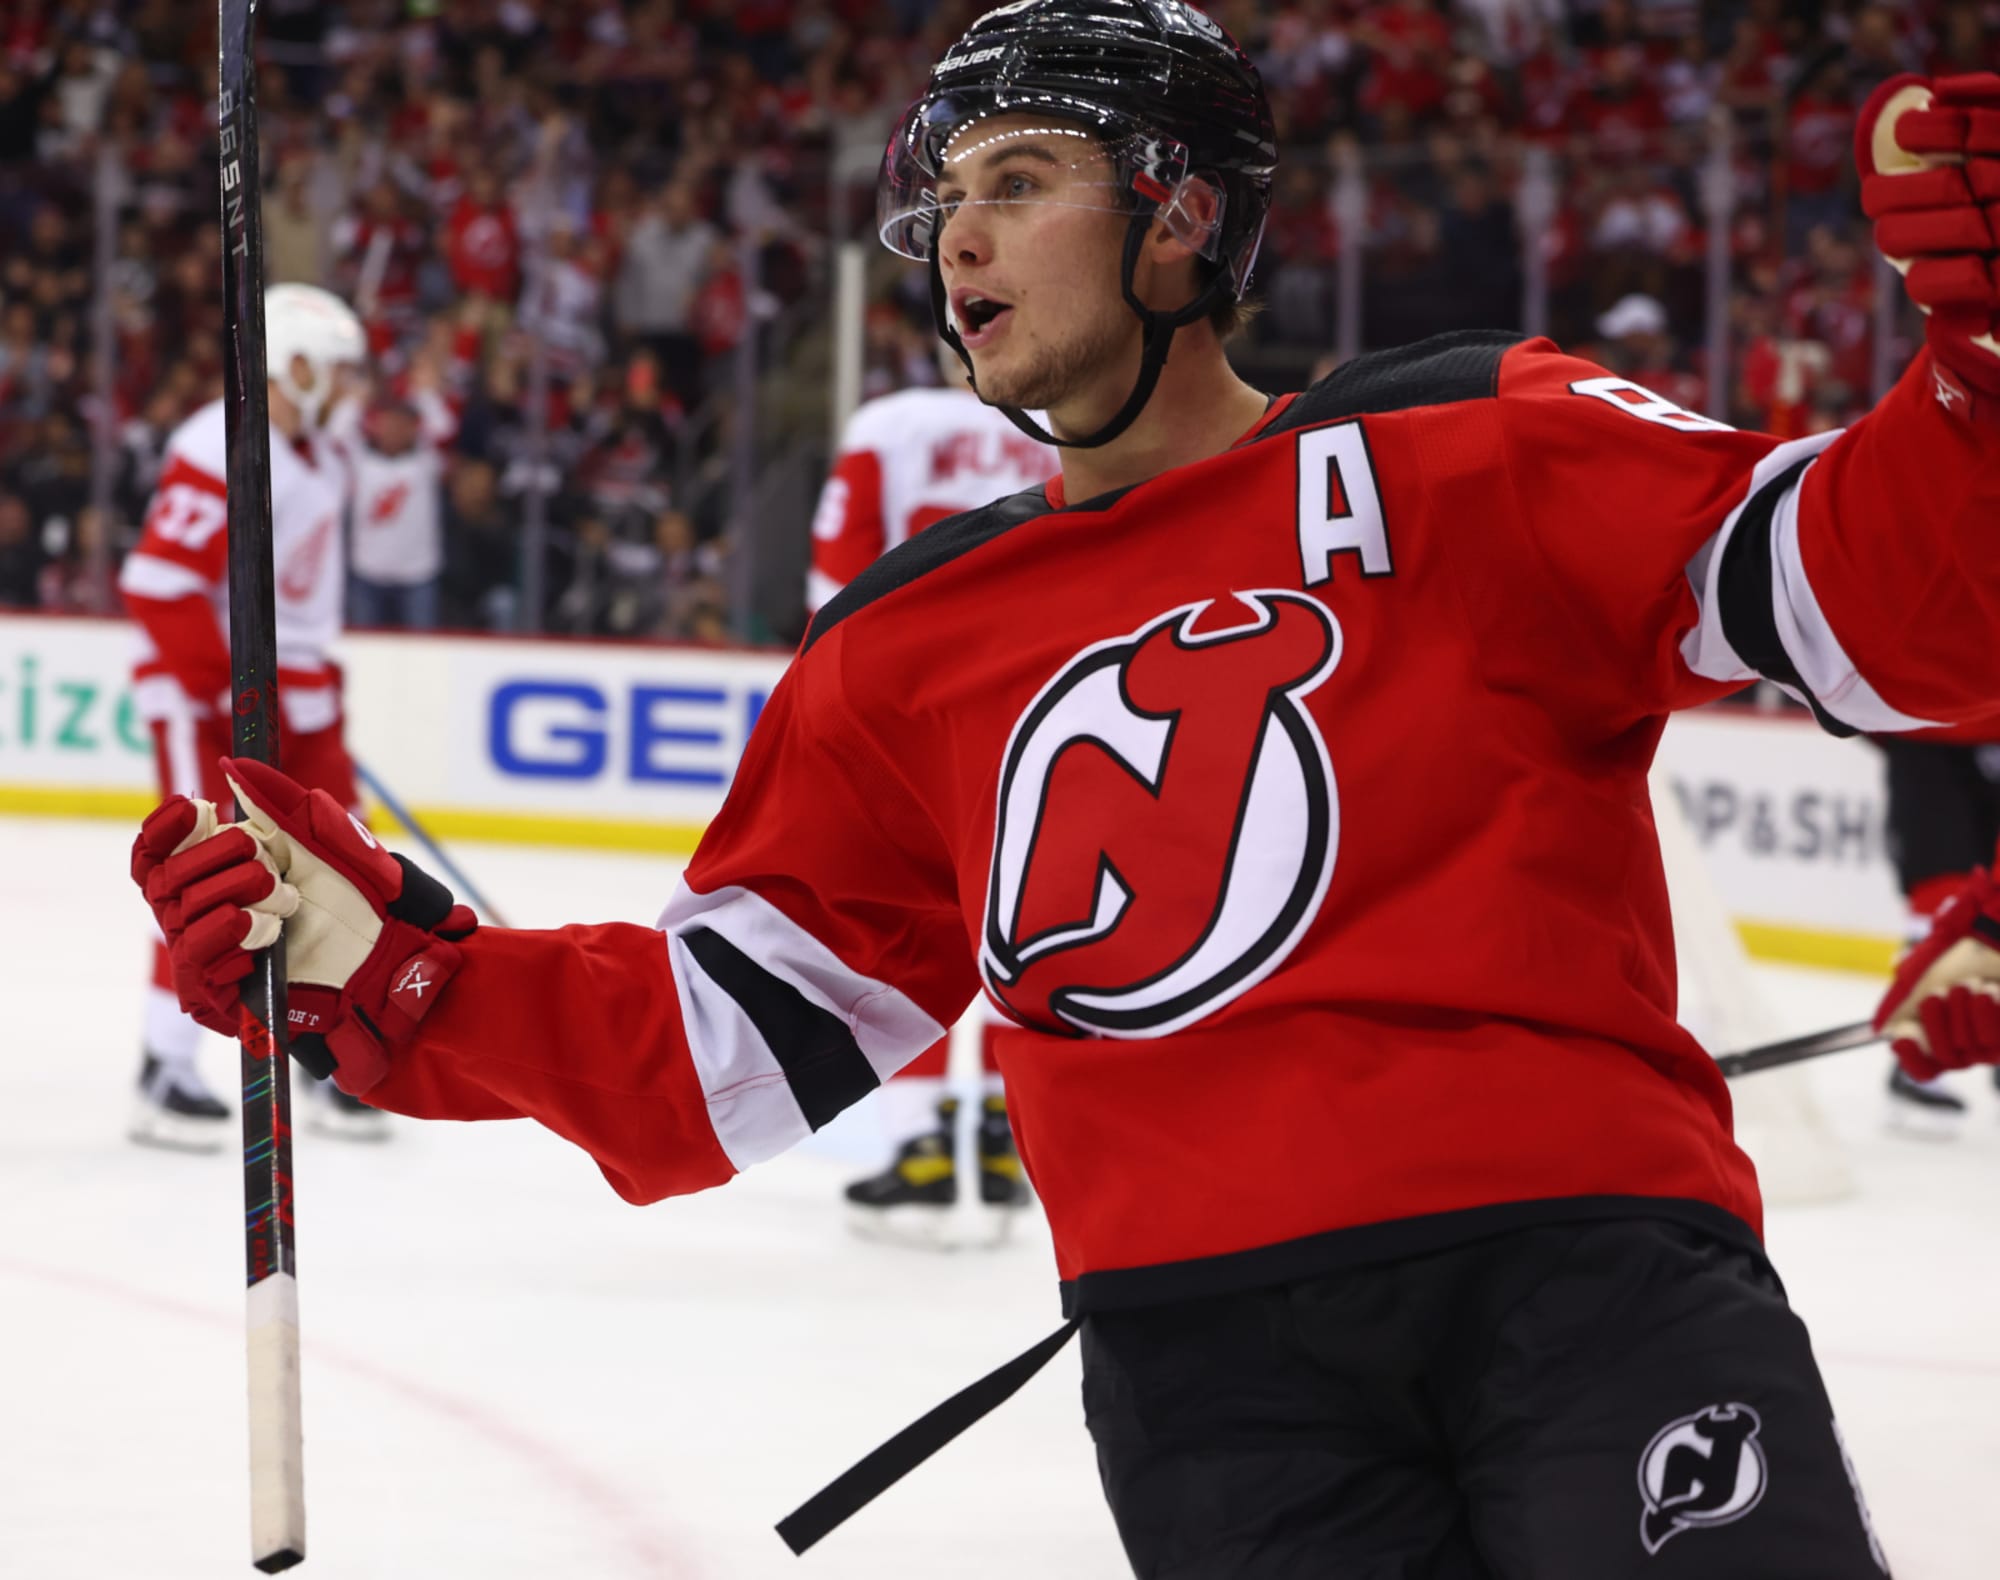 Devils Kick off Back-to-Back in Calgary, PREVIEW